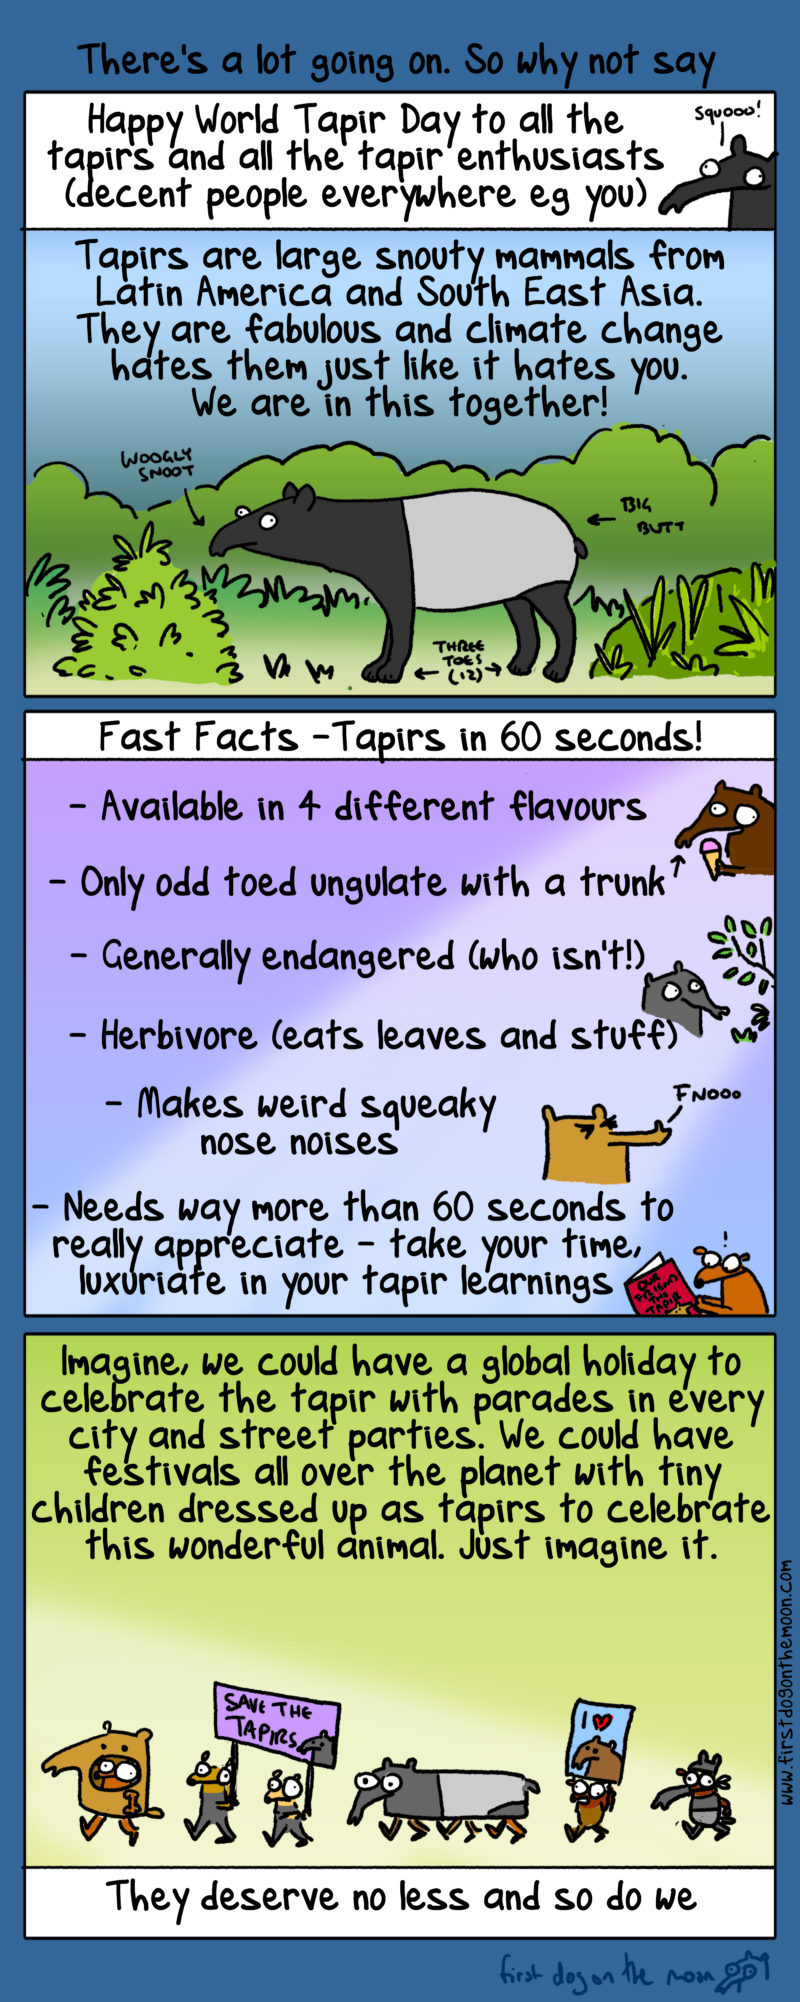 happy world tapir day to all the tapirs and tapir enthusiasts!